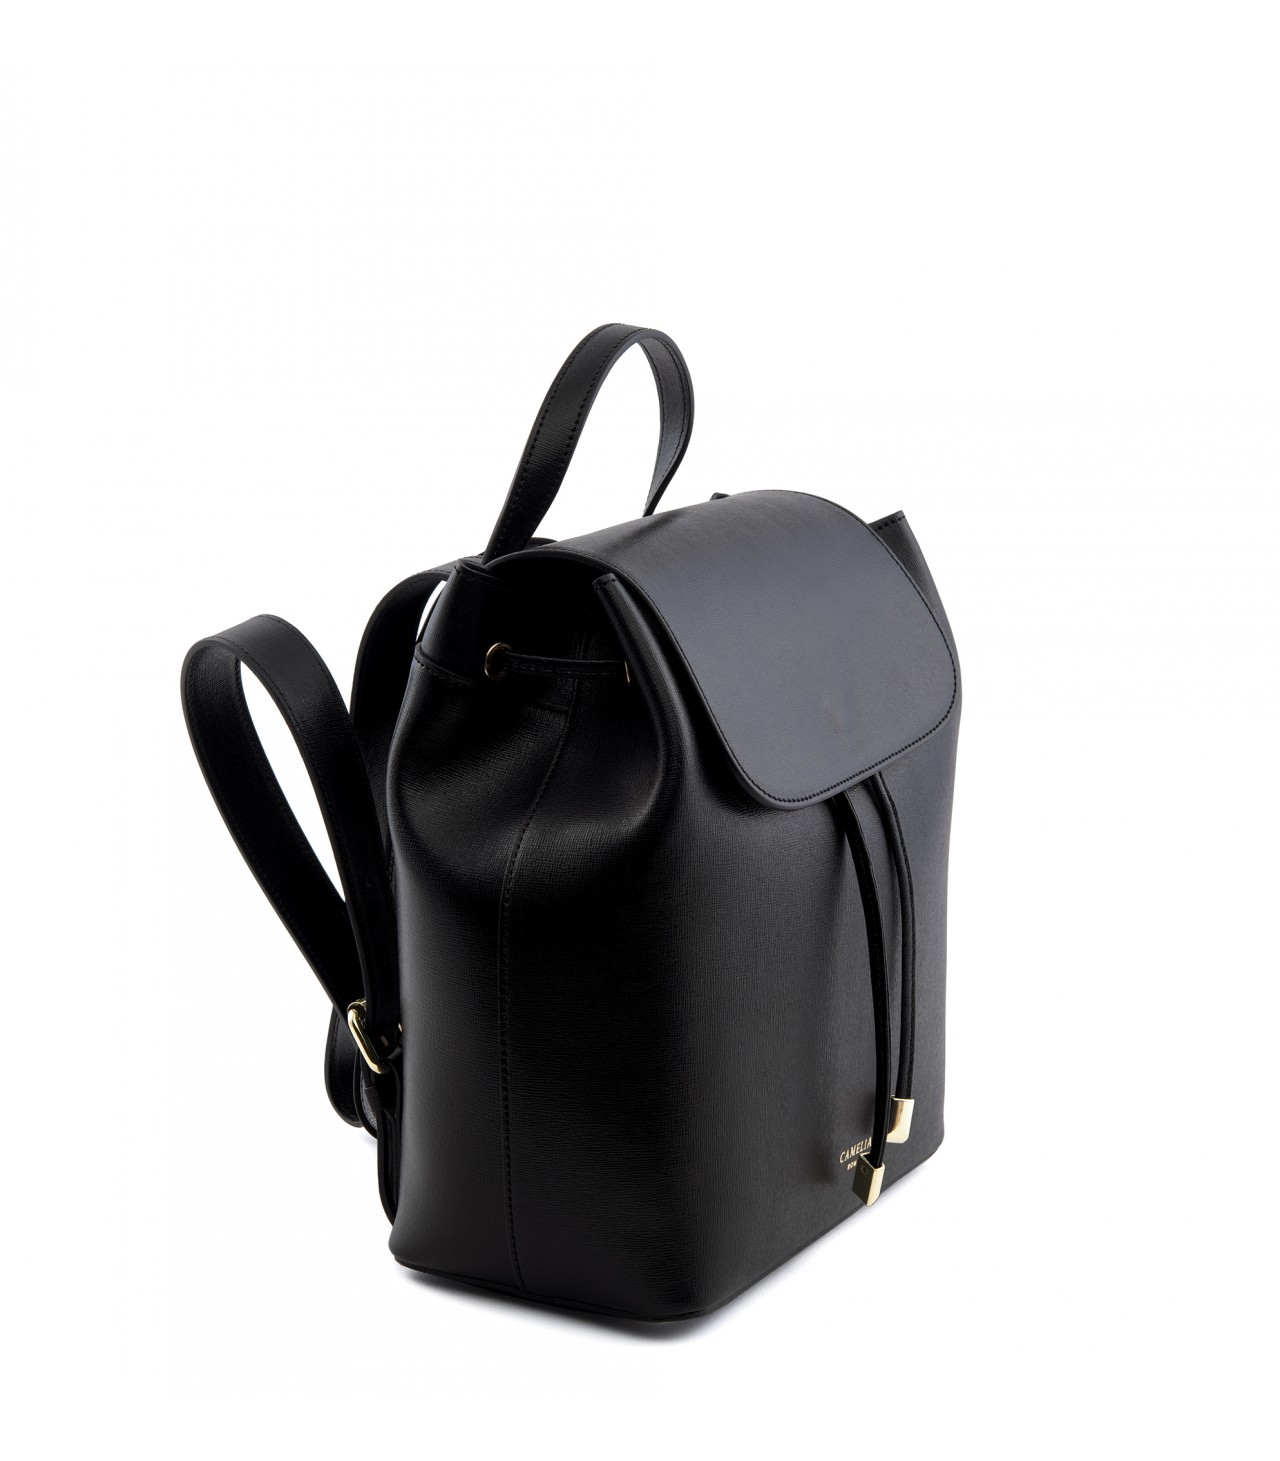 Saffiano Backpack